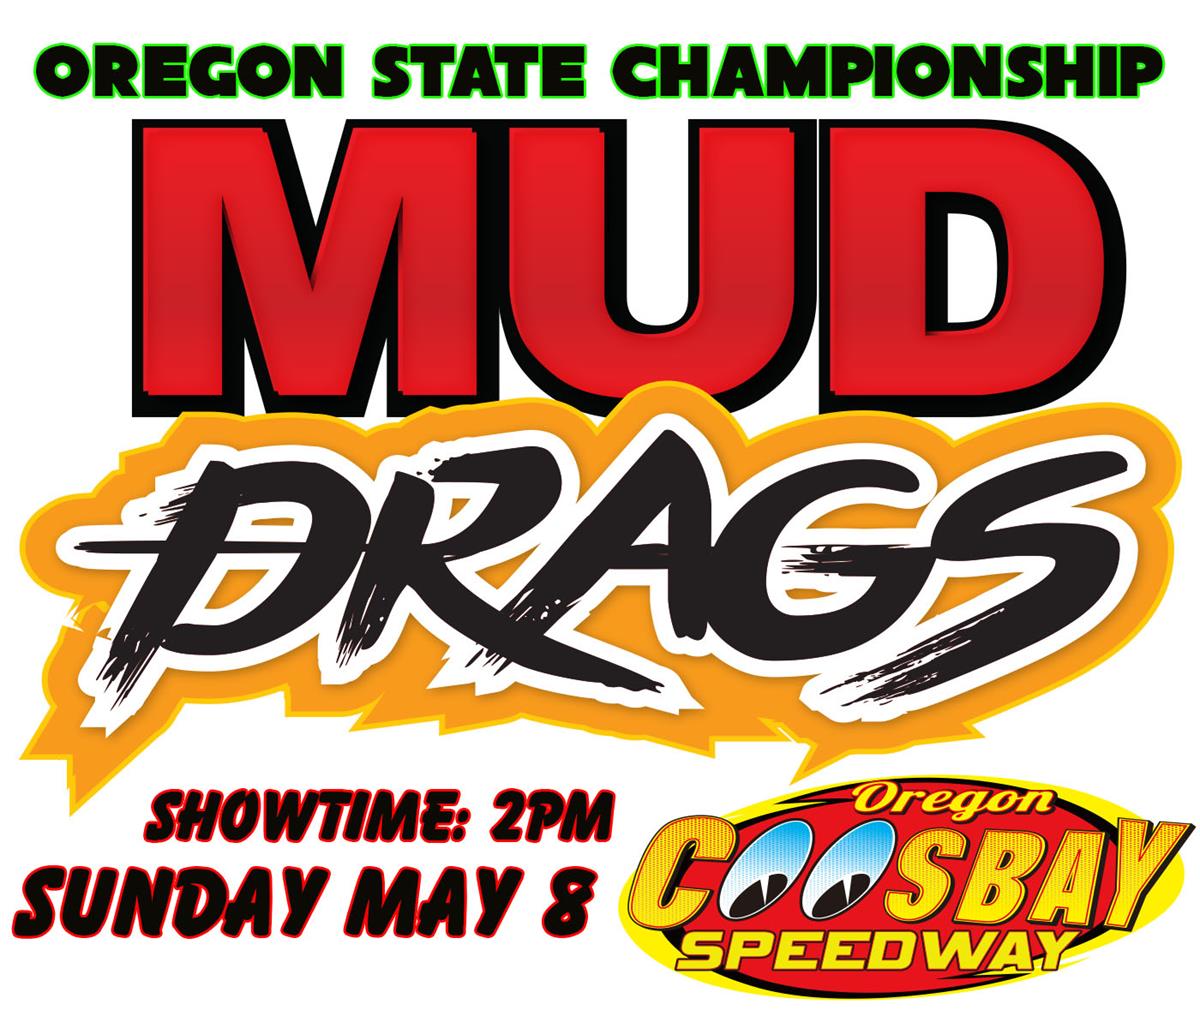 Oregon State Championships Mud Drags Sunday, May 8th